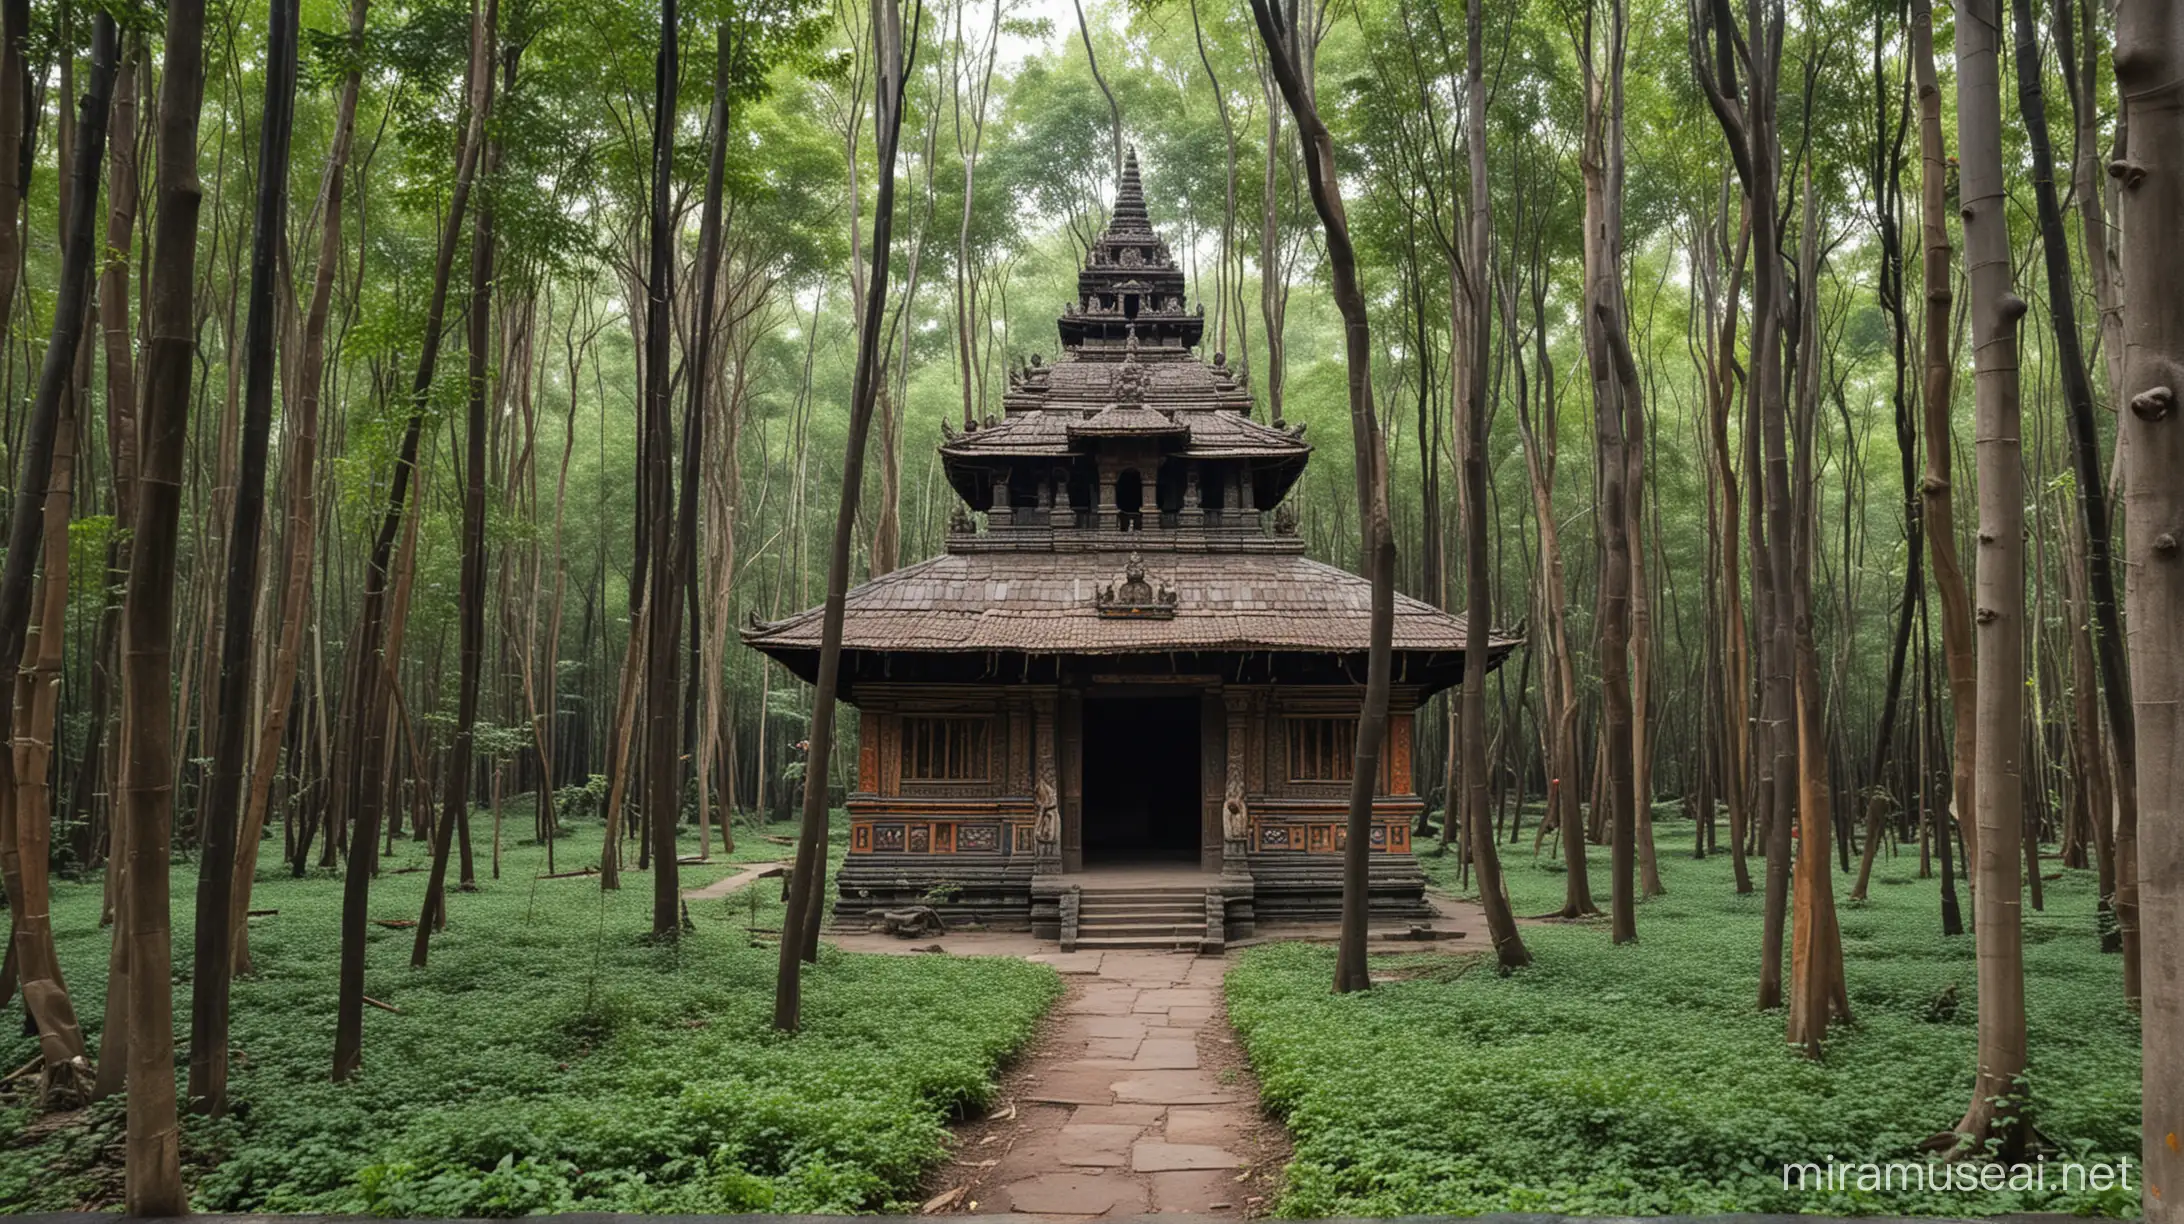 Majestic Kali Temple amidst Enchanting Forest